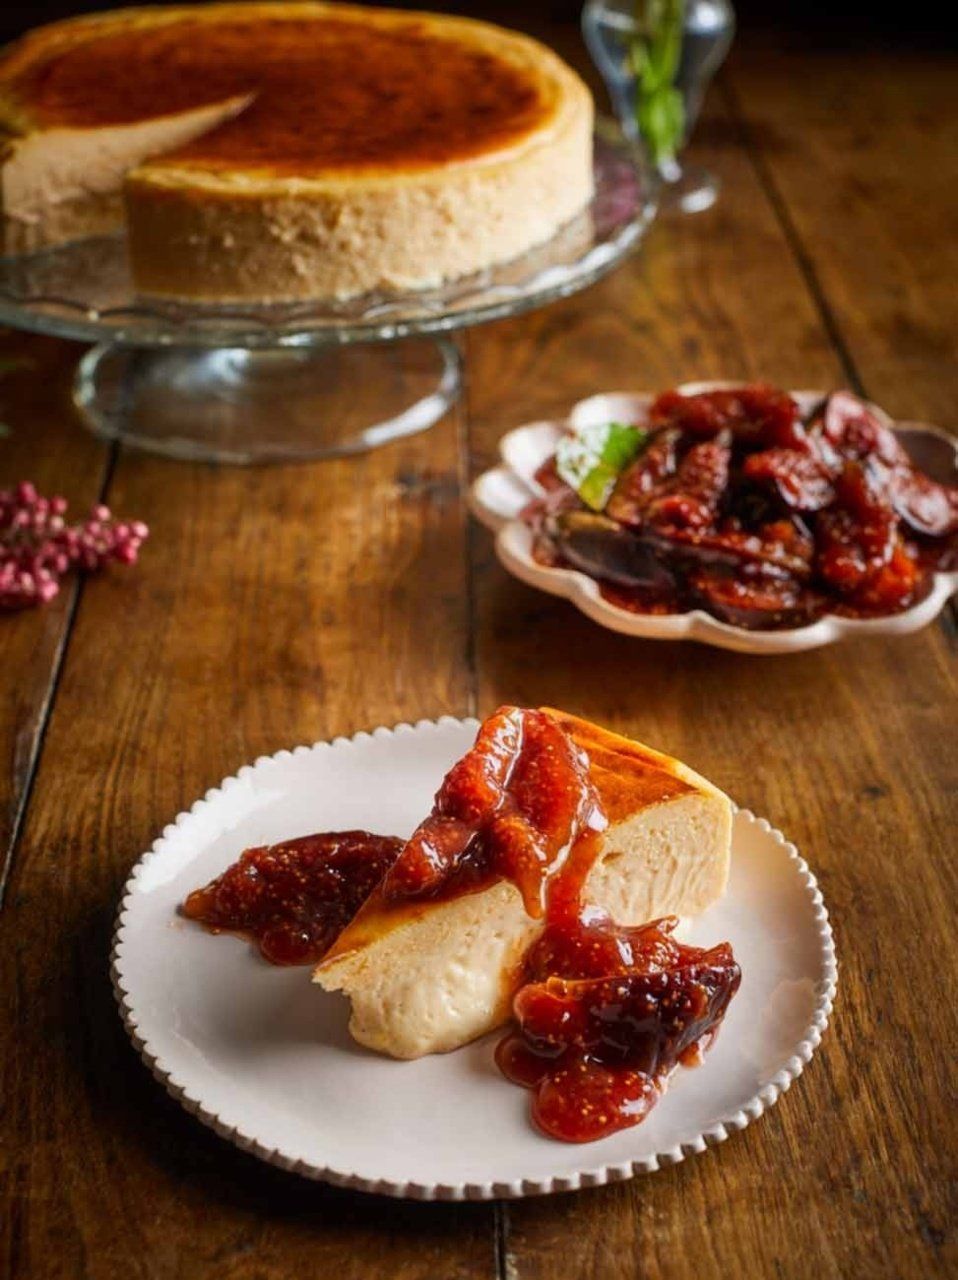 Baked cheesecake with fig compote